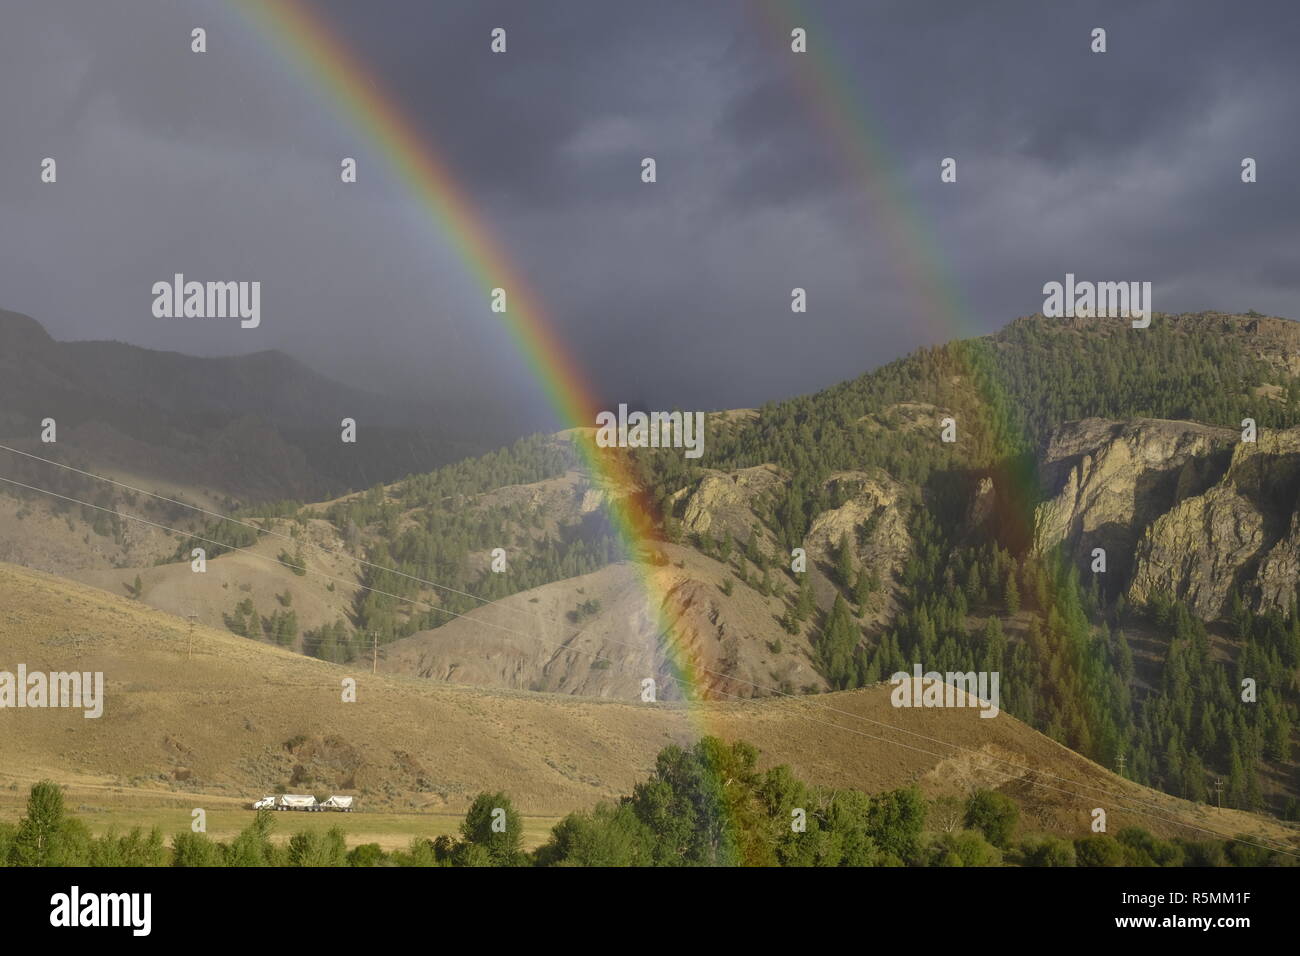 Rainbow and double rainbow over the mountains in central Idaho Stock Photo